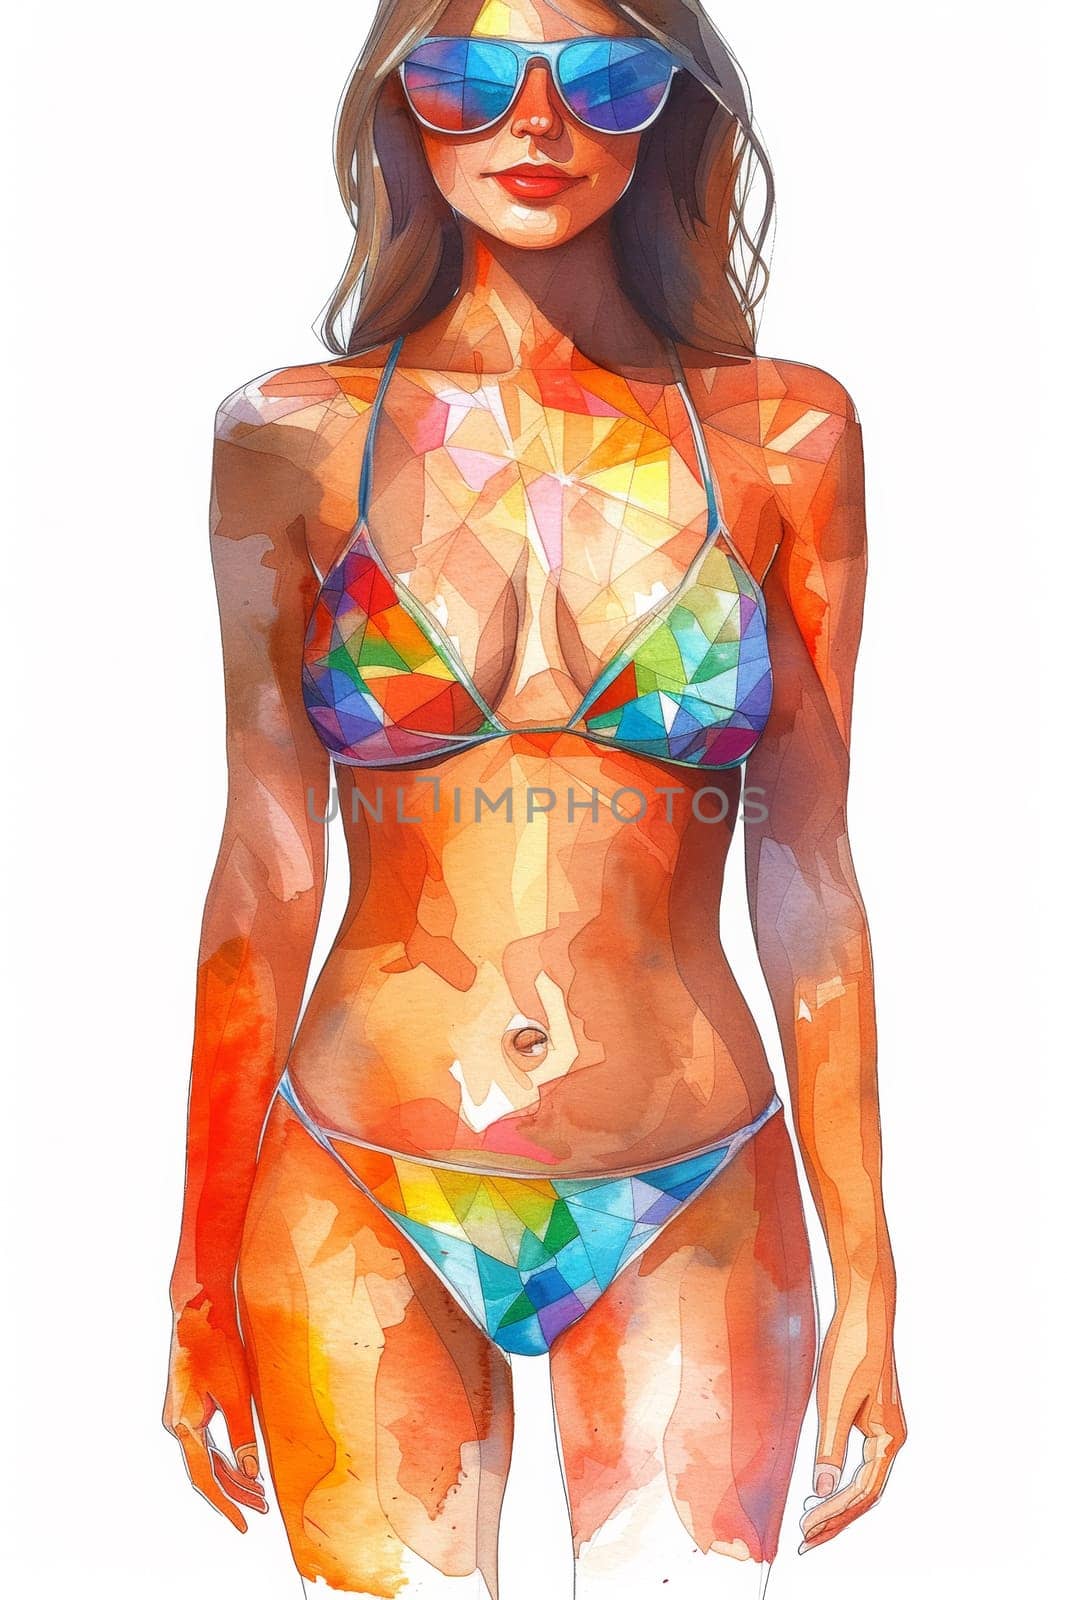 A woman in a bikini with sunglasses and colorful paint